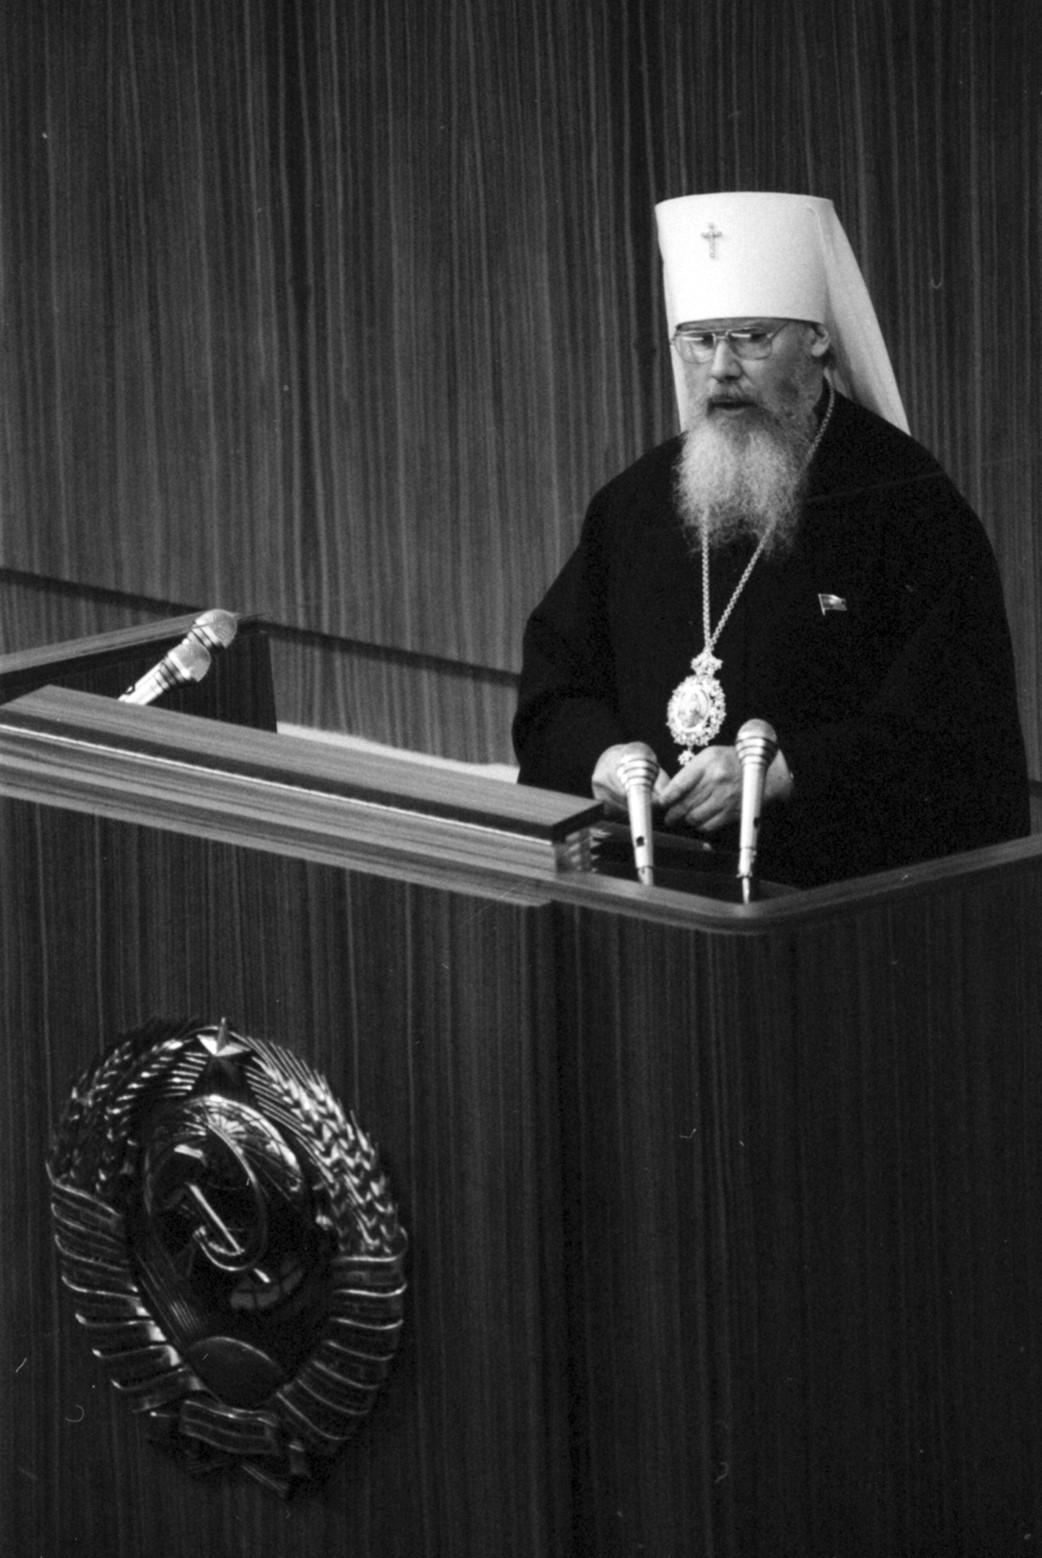 Figure 1: Deputy from the Soviet Foundation for Charity and Health, Metropolitan of Leningrad and Novgorod Alexy (Ridiger) during a speech at the First Congress of People’s Deputies of the USSR, Moscow, May 31, 1989. Photo by V. Zav’ialov. From the collection of the Russian State Film and Photo Archive (RGAKFD), Krasnogorsk, Item 0-383480.